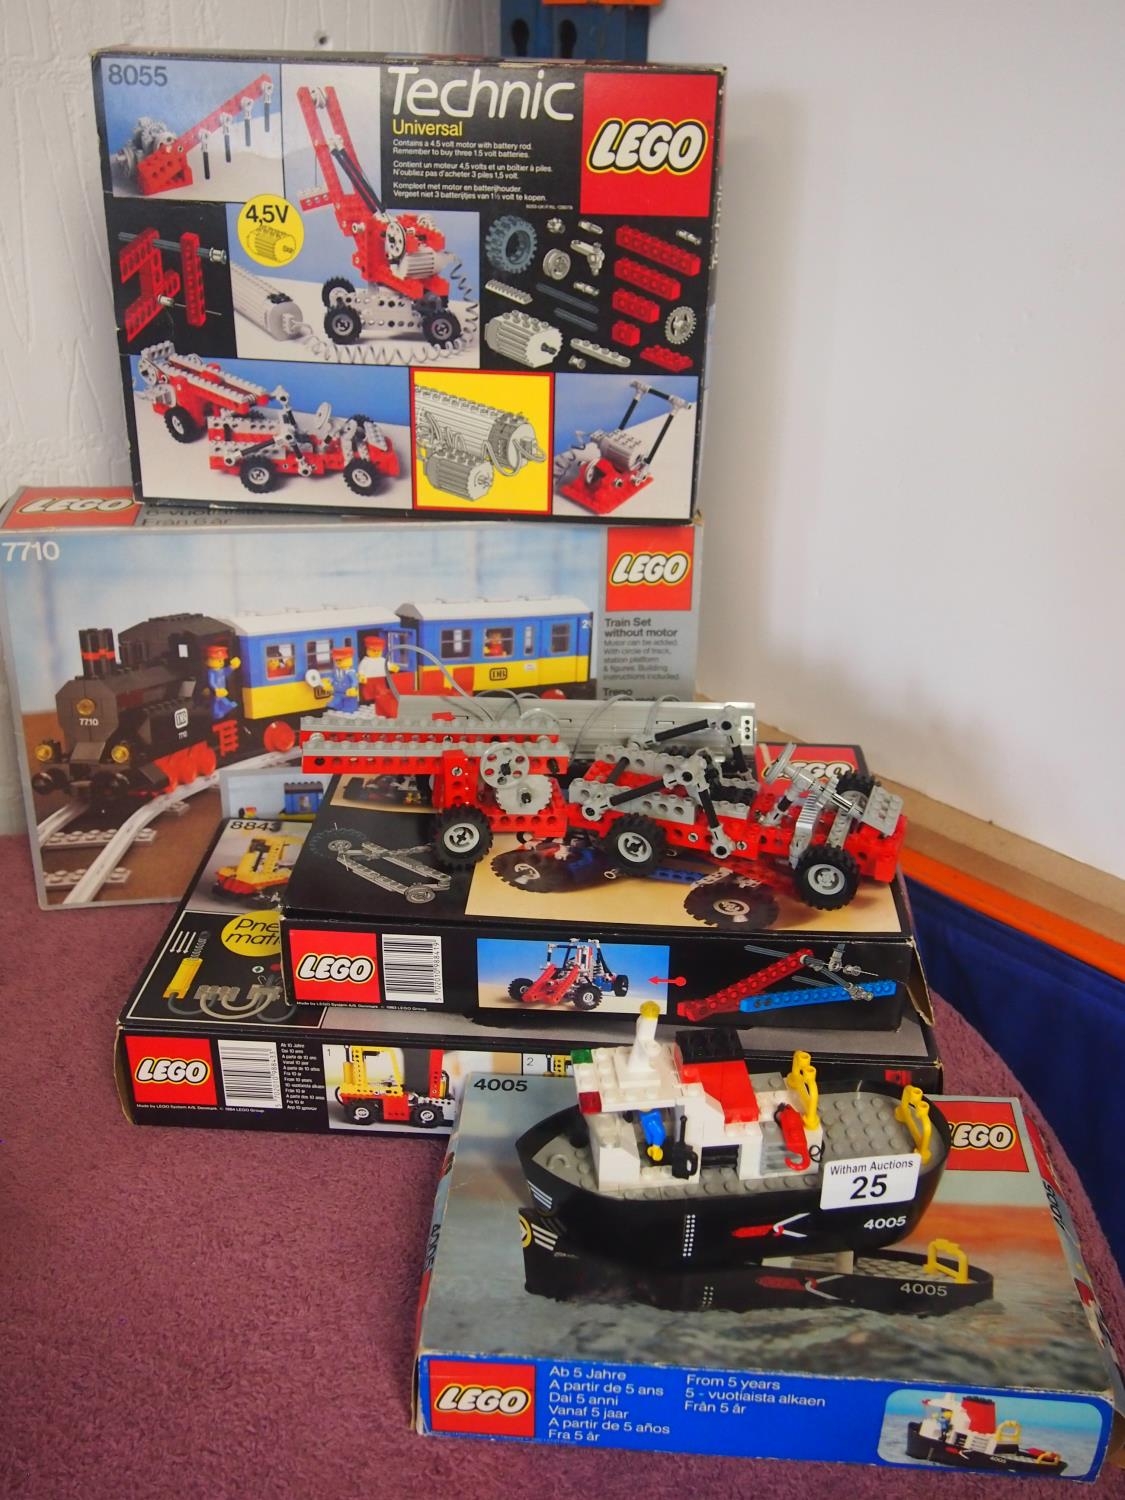 1980's boxed Lego Technic sets nos. 4005, 7710, 8055, 8843, all with